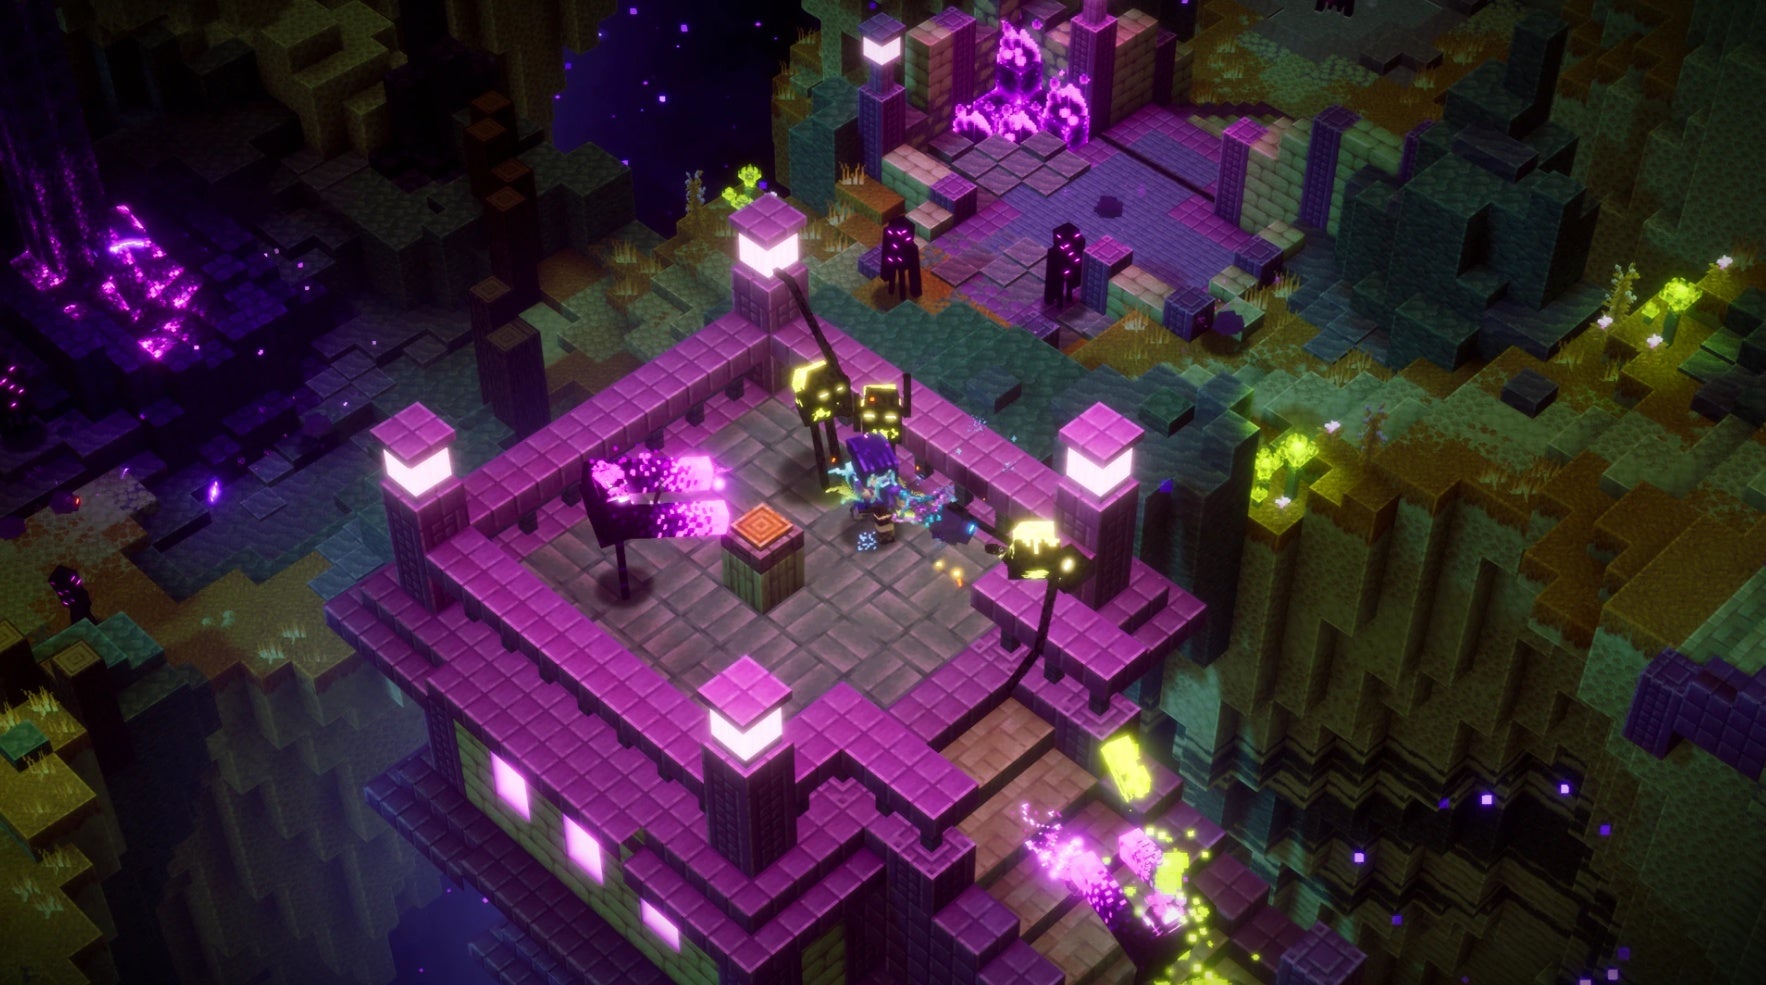 A screenshot of Minecraft Dungeon's Echoing Void DLC showing a topdown view of a blocky platform on which the player is fighting Endermen under purple light.